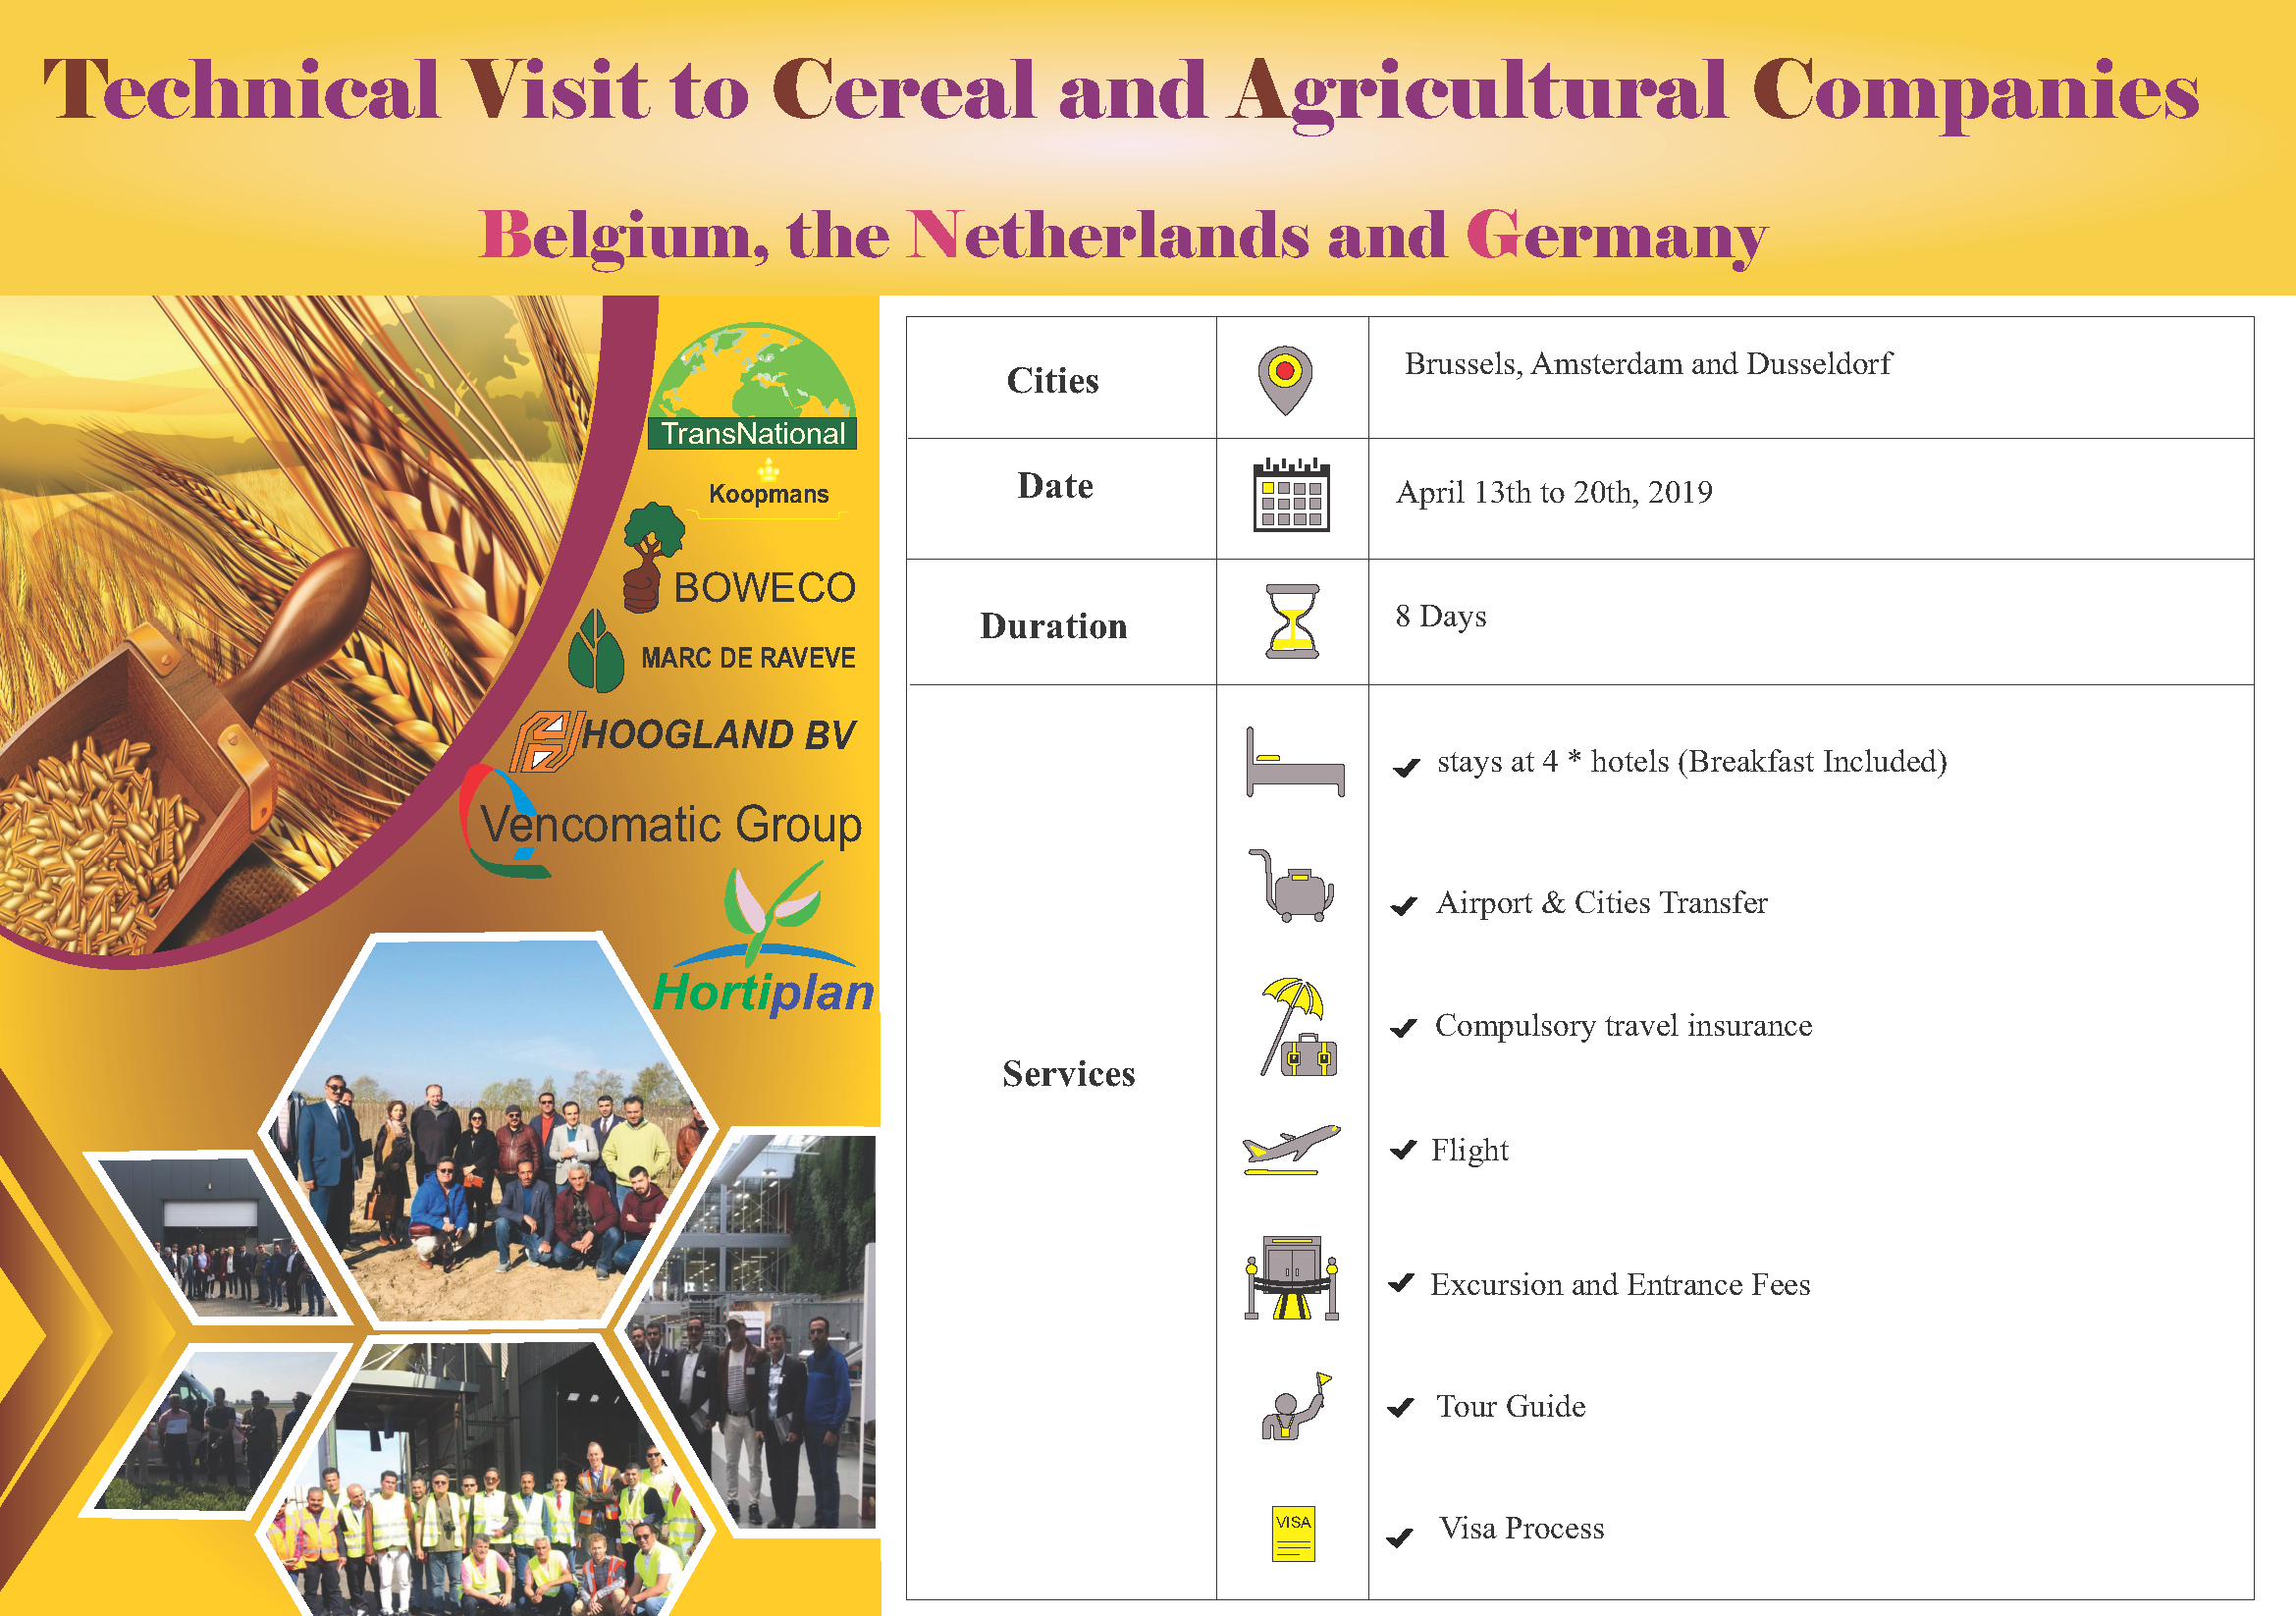 Technical Visit to Cereal and Agricultural Companies, Apr. 2019